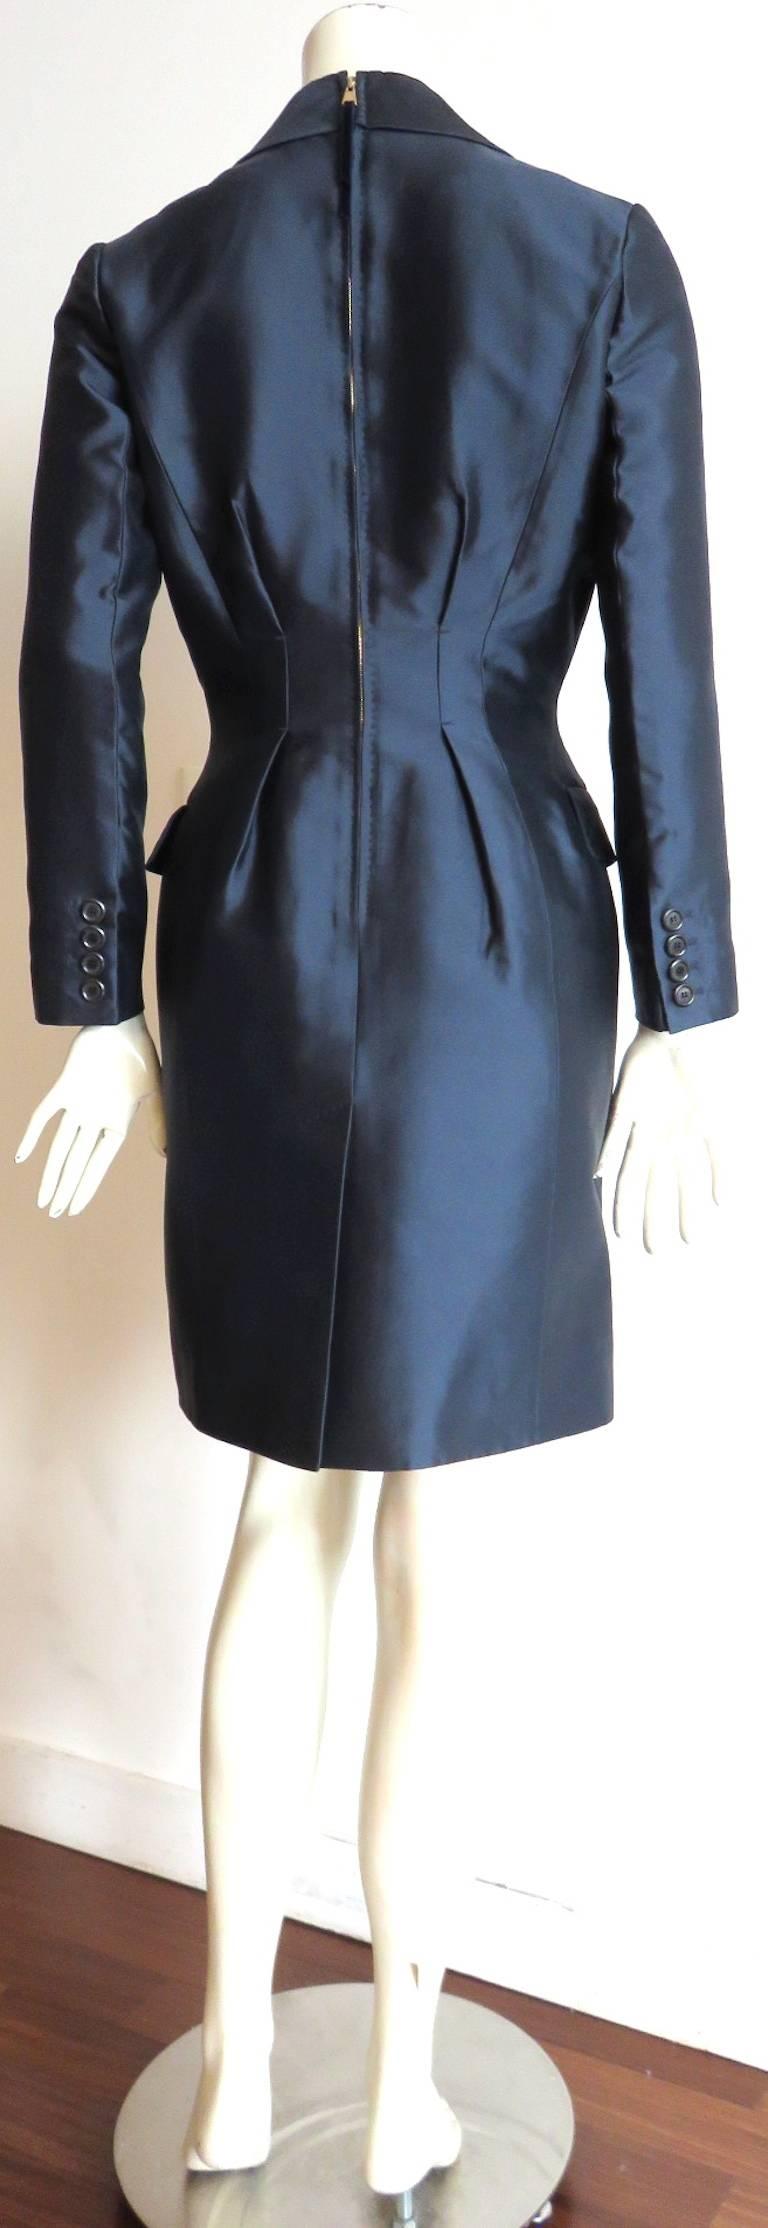 Women's LOUIS VUITTON Silk satin evening coat with dress-style back  For Sale